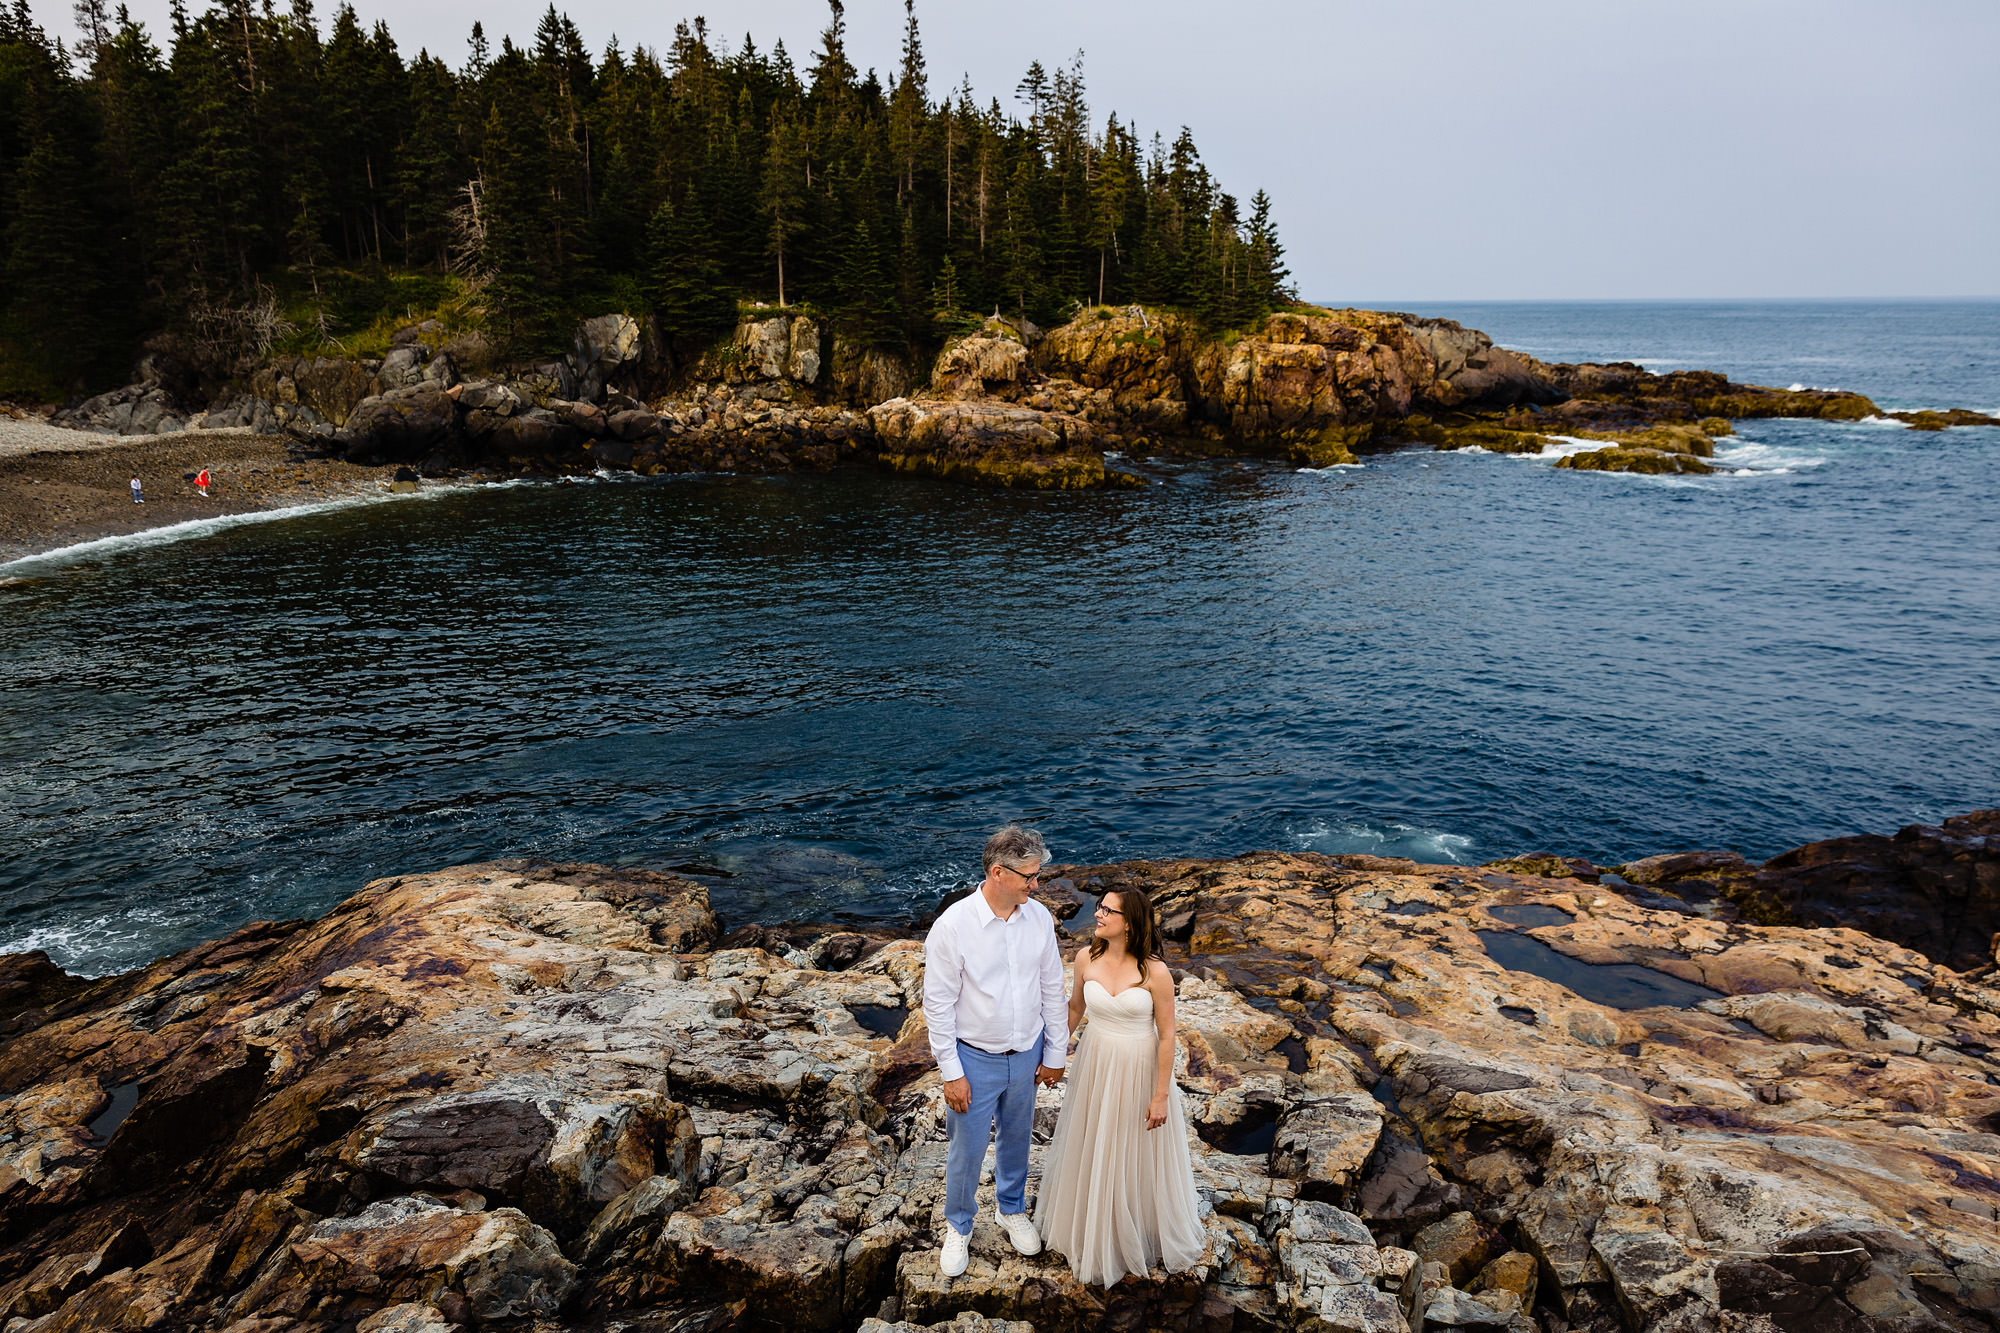 An elopement couple at a rocky beach in Acadia National Park